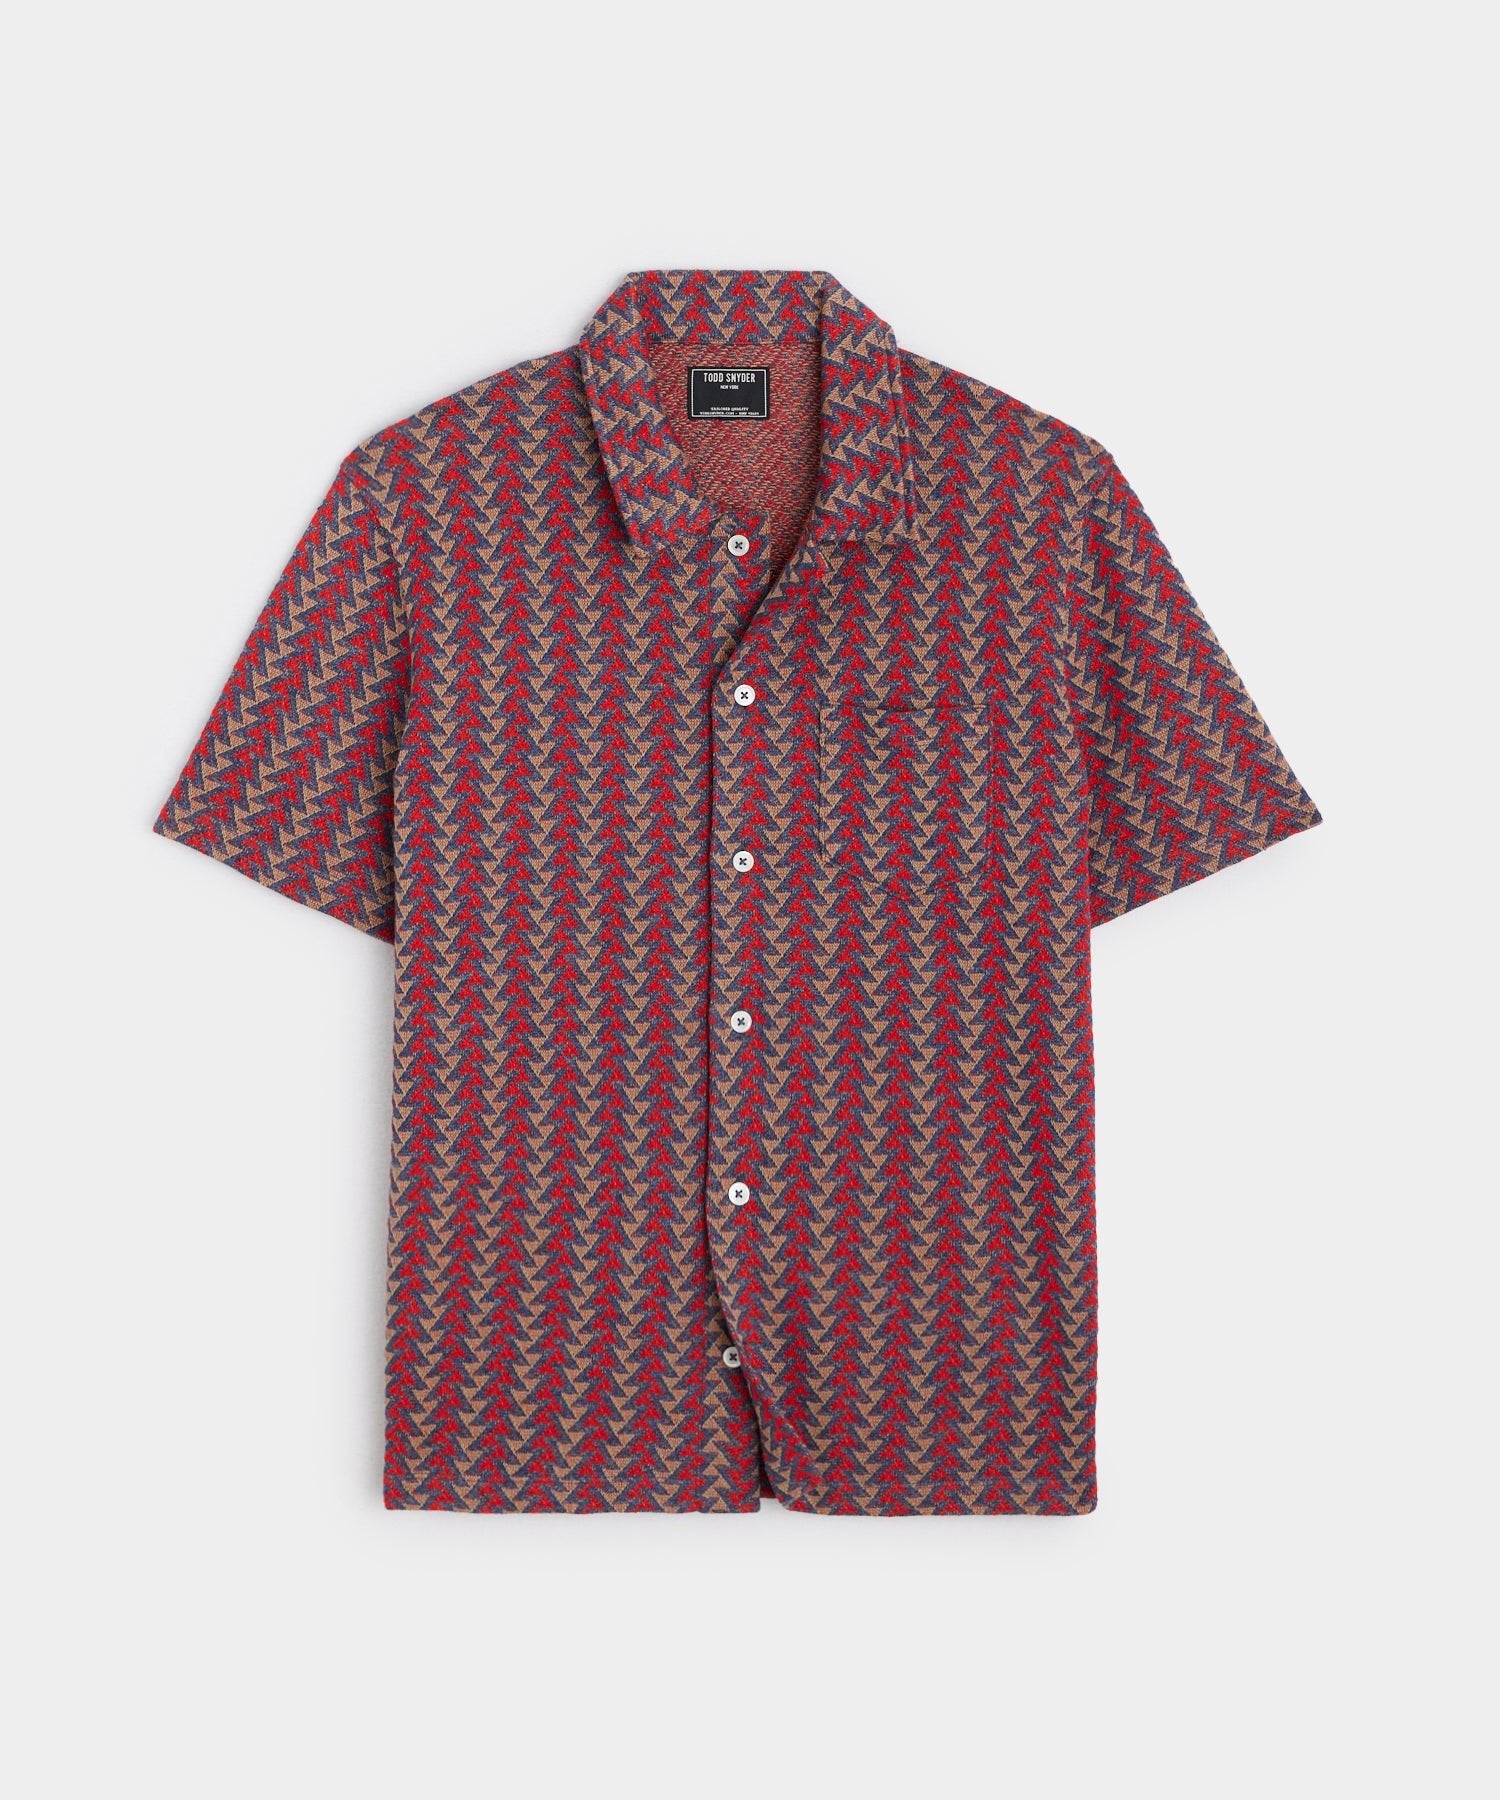 Triangle Knit Jacquard Shirt in Red Copper